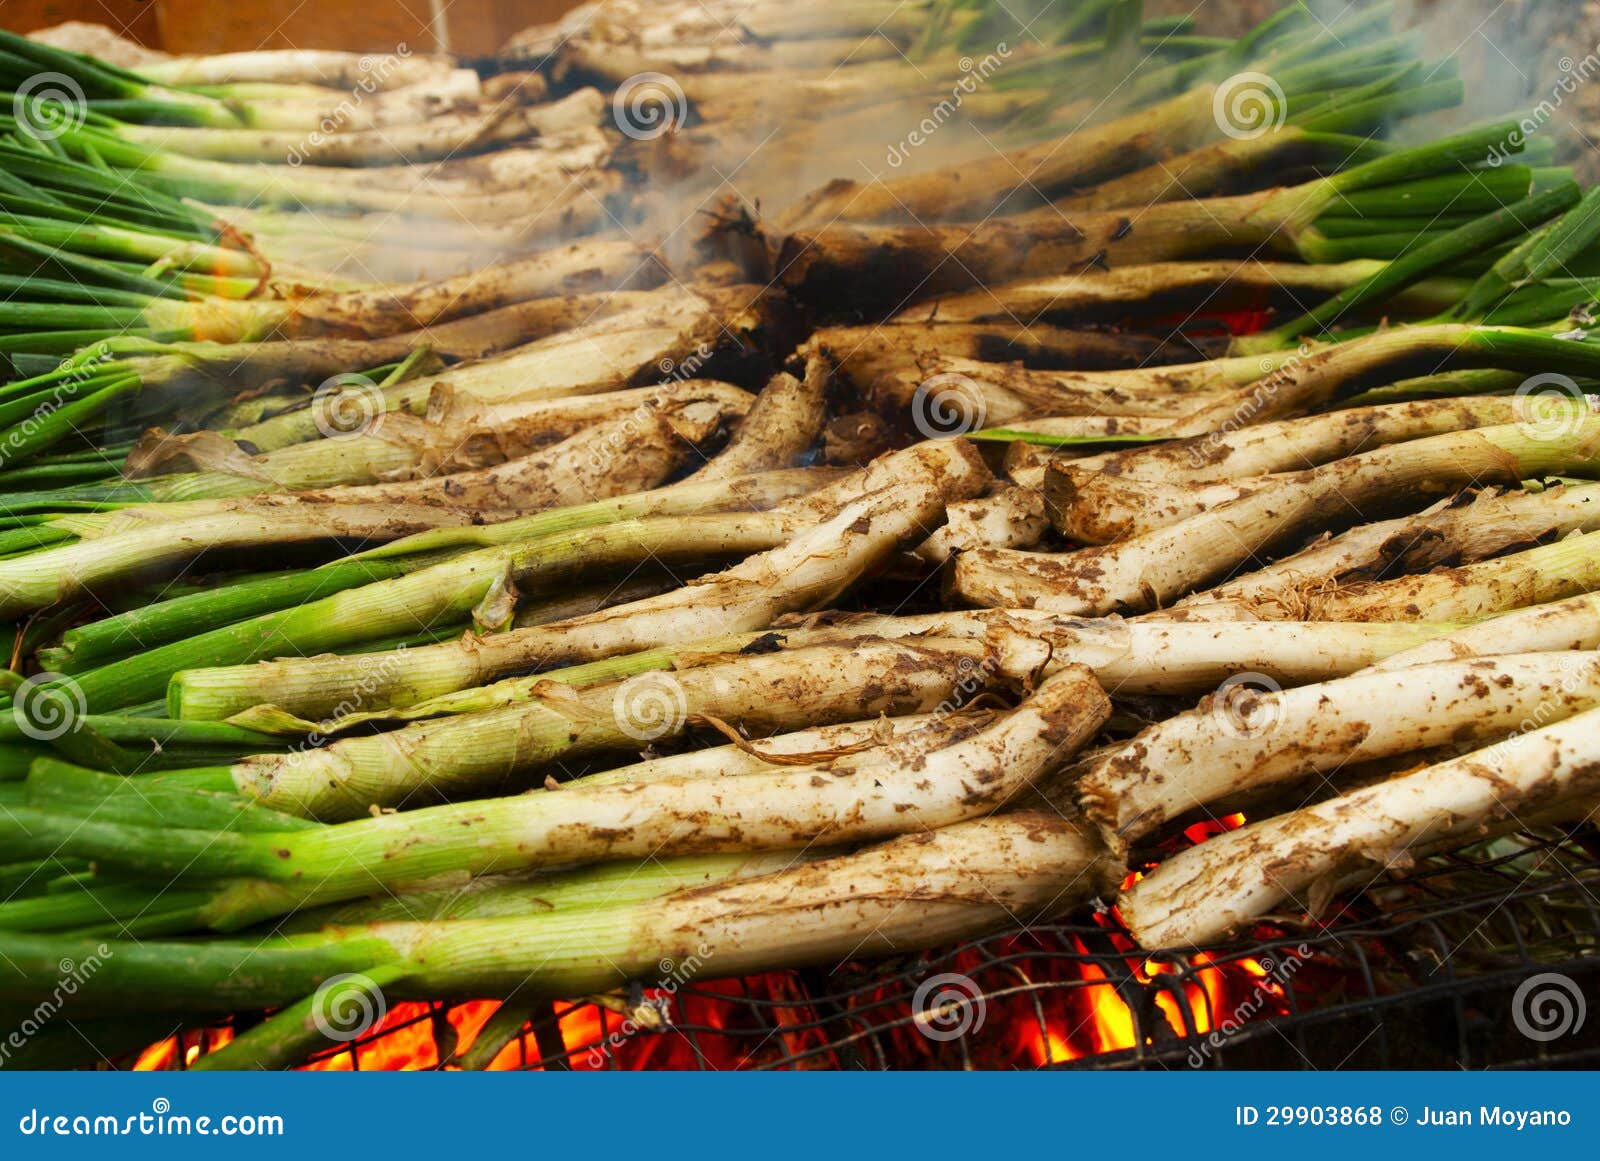 calcots, catalan sweet onions